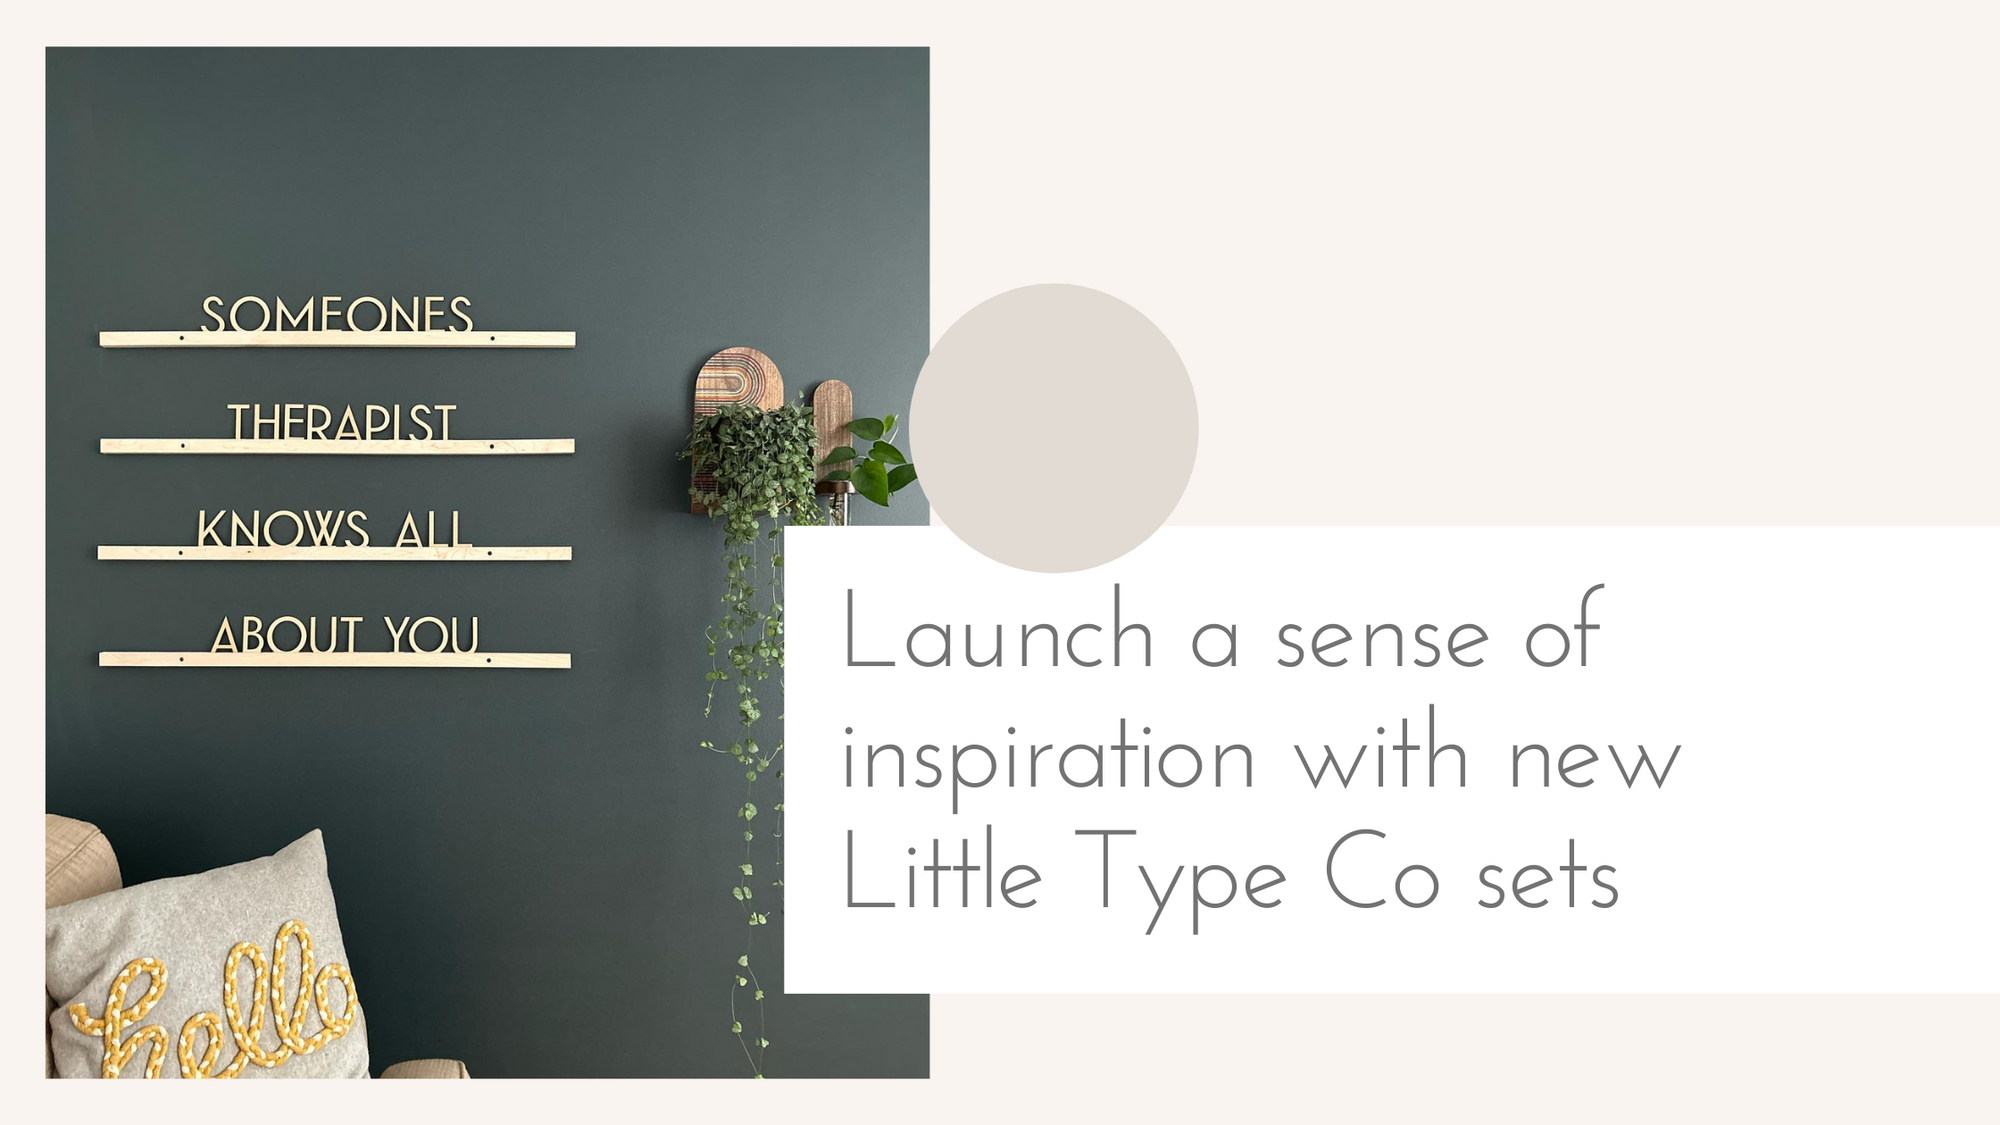 Launch a sense of inspiration with new Little Type Co sets